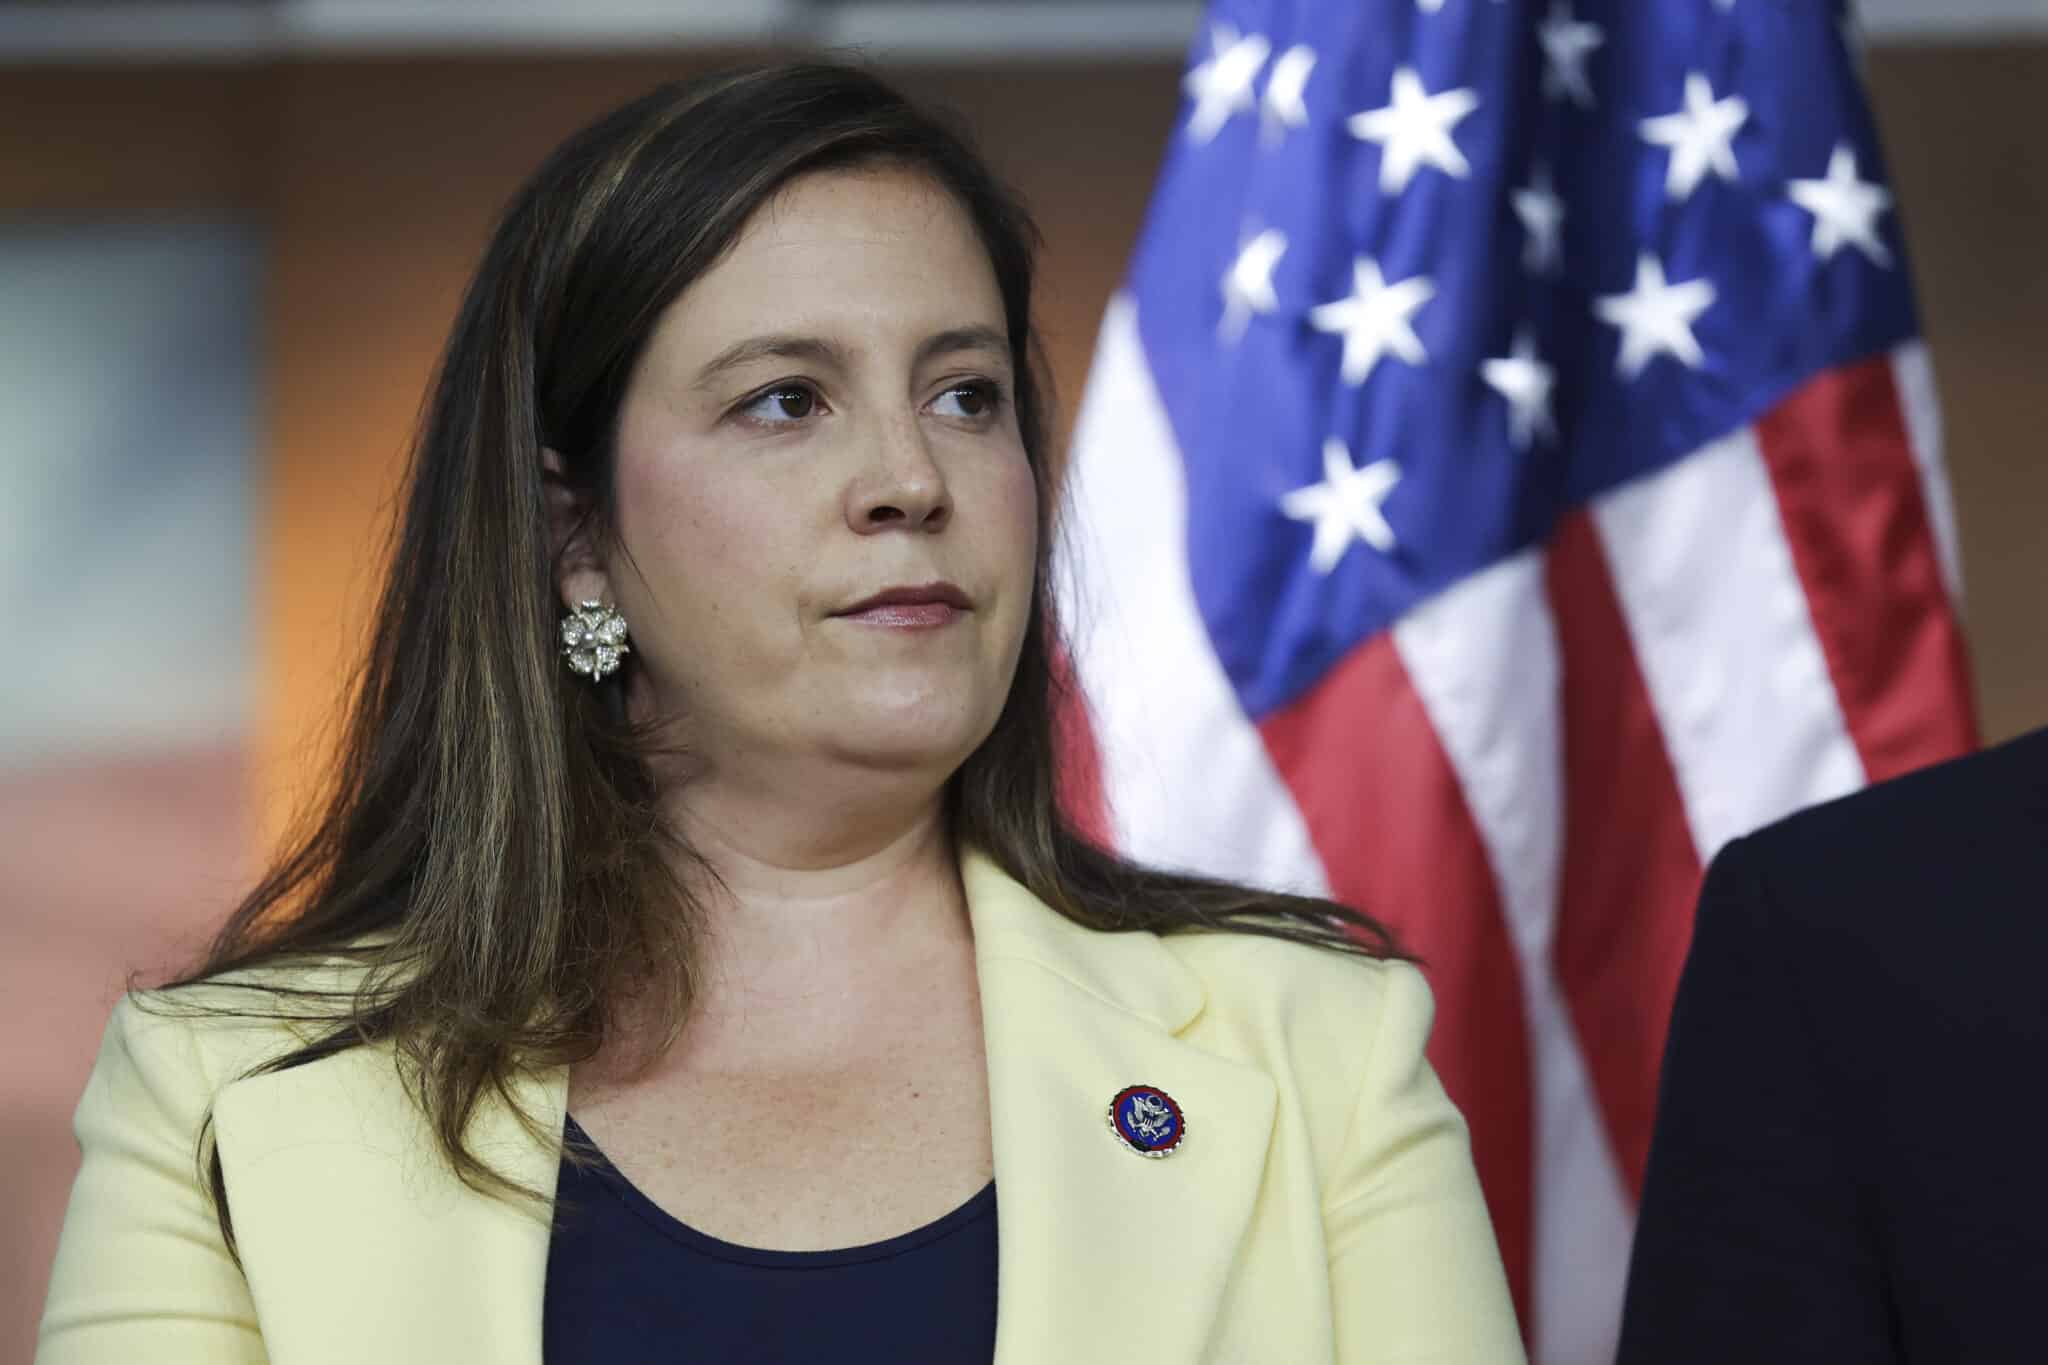 WASHINGTON, DC - JUNE 08: U.S. House Republican Conference Chair Elise Stefanik (R-NY) attends at a press conference following a Republican caucus meeting, at the U.S. Capitol on June 08, 2022 in Washington, DC. Stefanik spoke out against the January 6 Committee hearings set to begin tomorrow. (Photo by Kevin Dietsch/Getty Images)